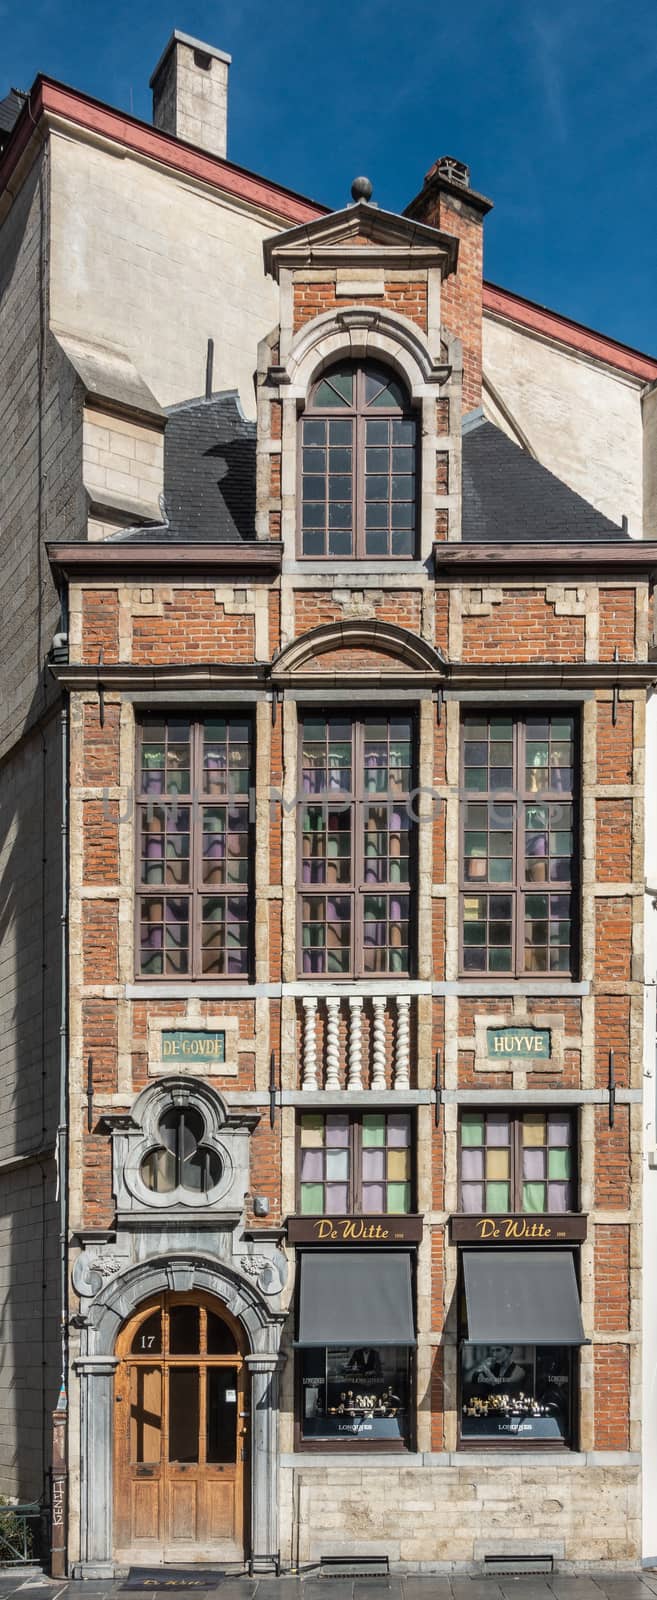 Brussels, Belgium - September 26, 2018: De Witte Jewelry store built against the Saint Nicolas Church with historic red brick facade and inscriptions and pillars under windows.